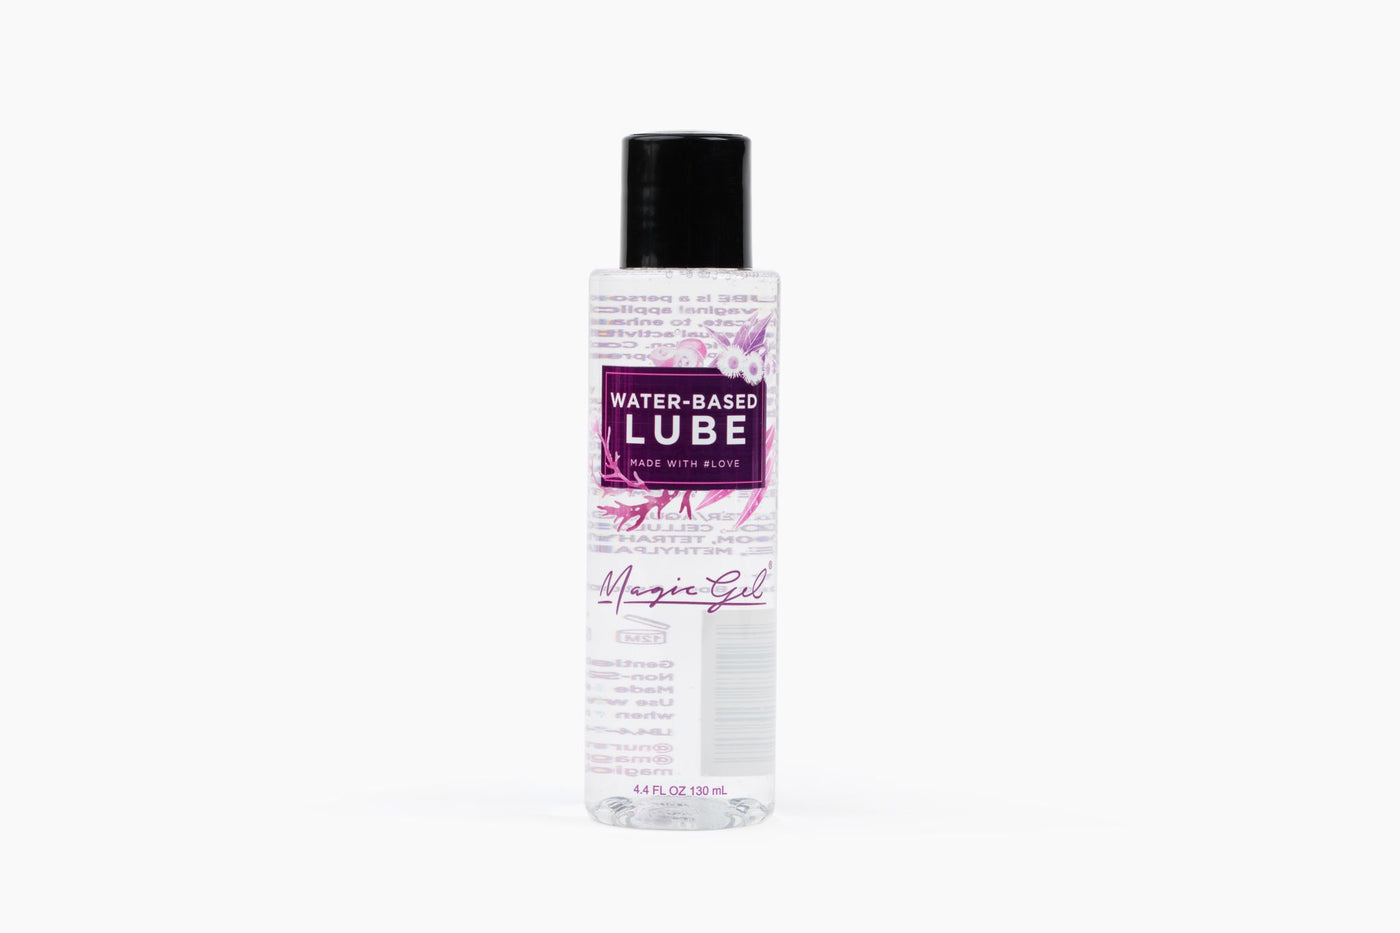 LubeLife Water Based Lubricant for Men and Women - Flavorless (12 Fl Oz)